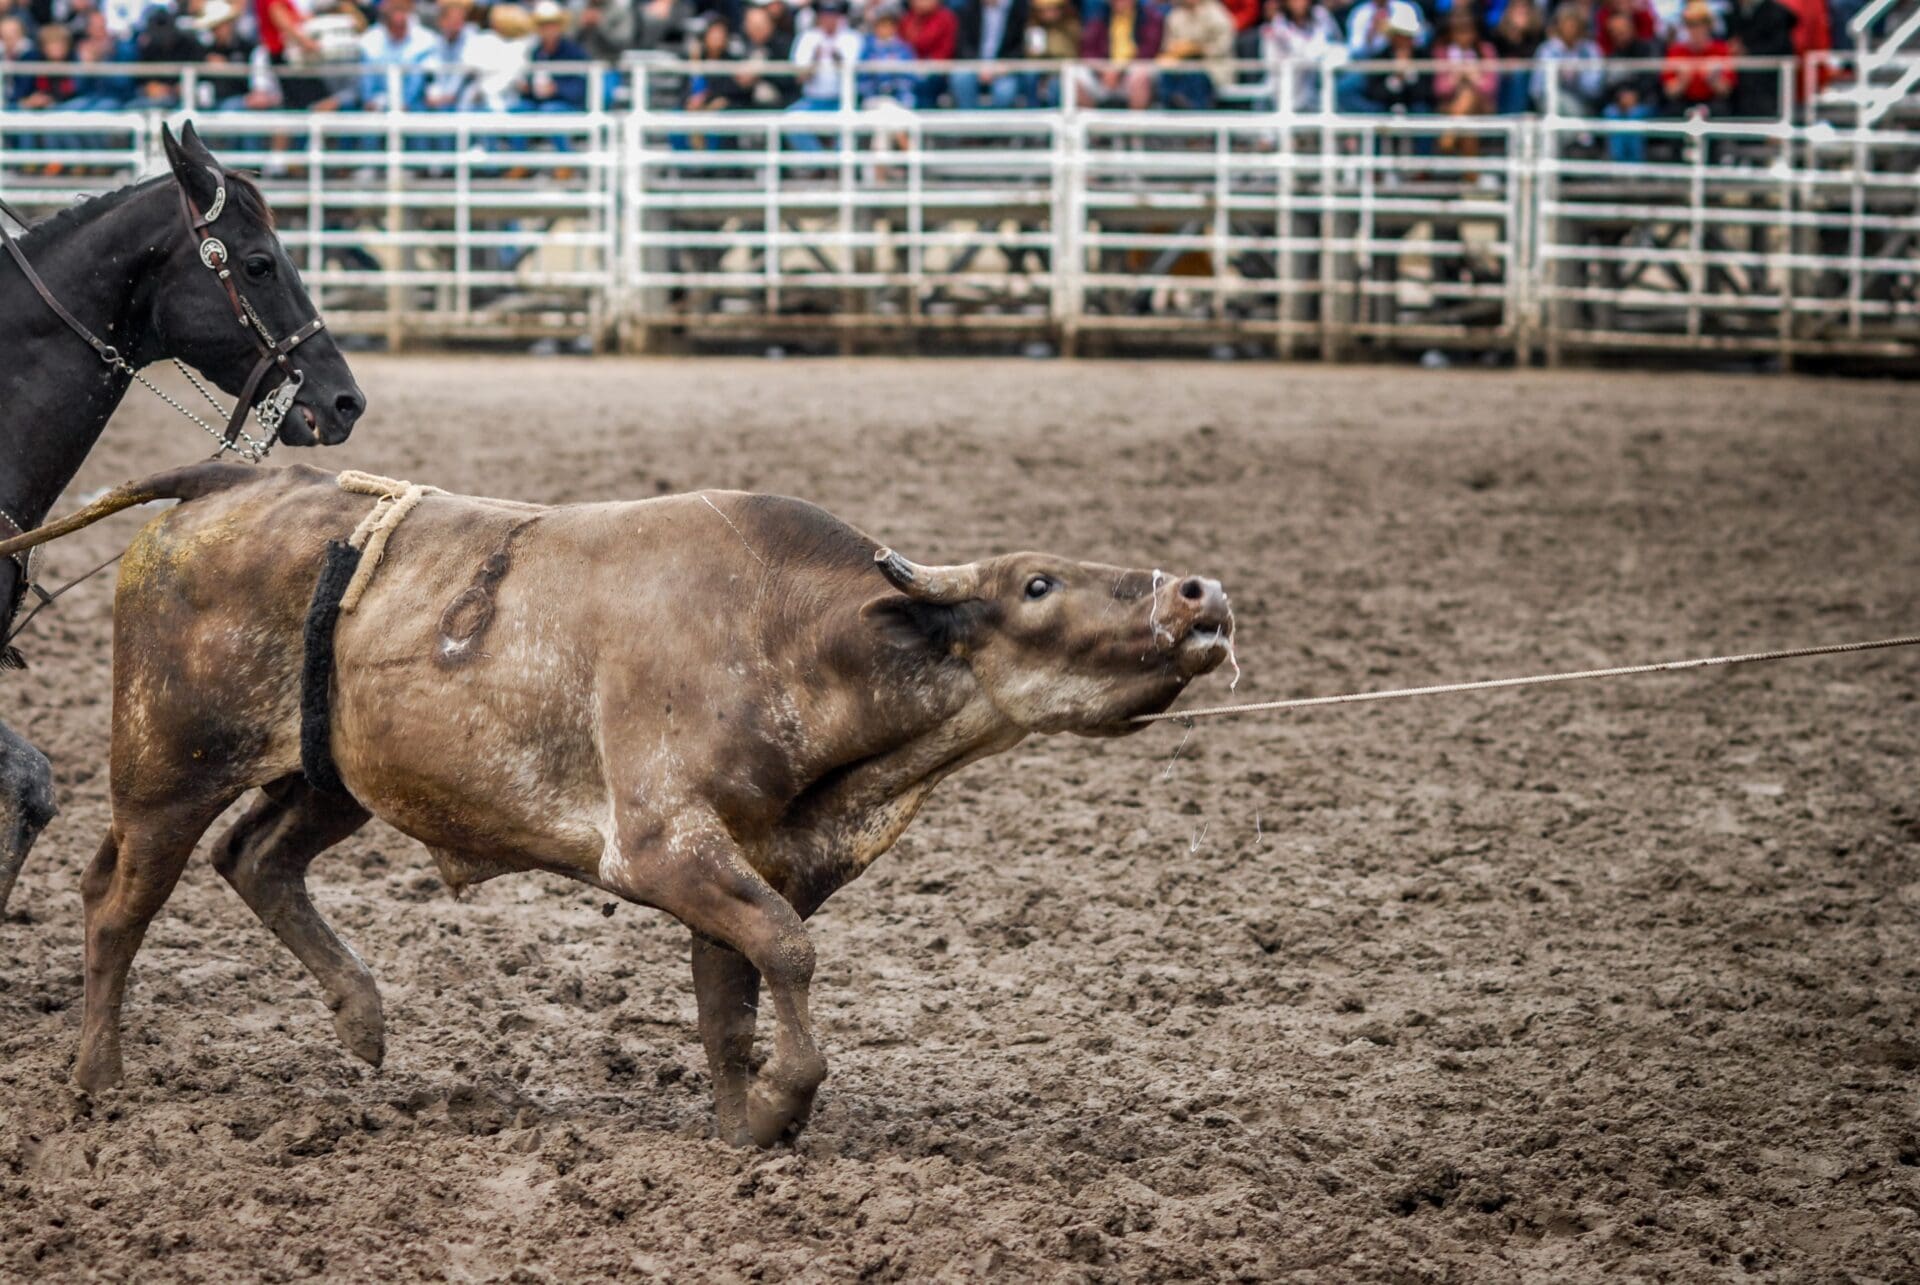 A bull is pulled on a rope while drooling heavily after a bucking event at the Calgary Stampede.